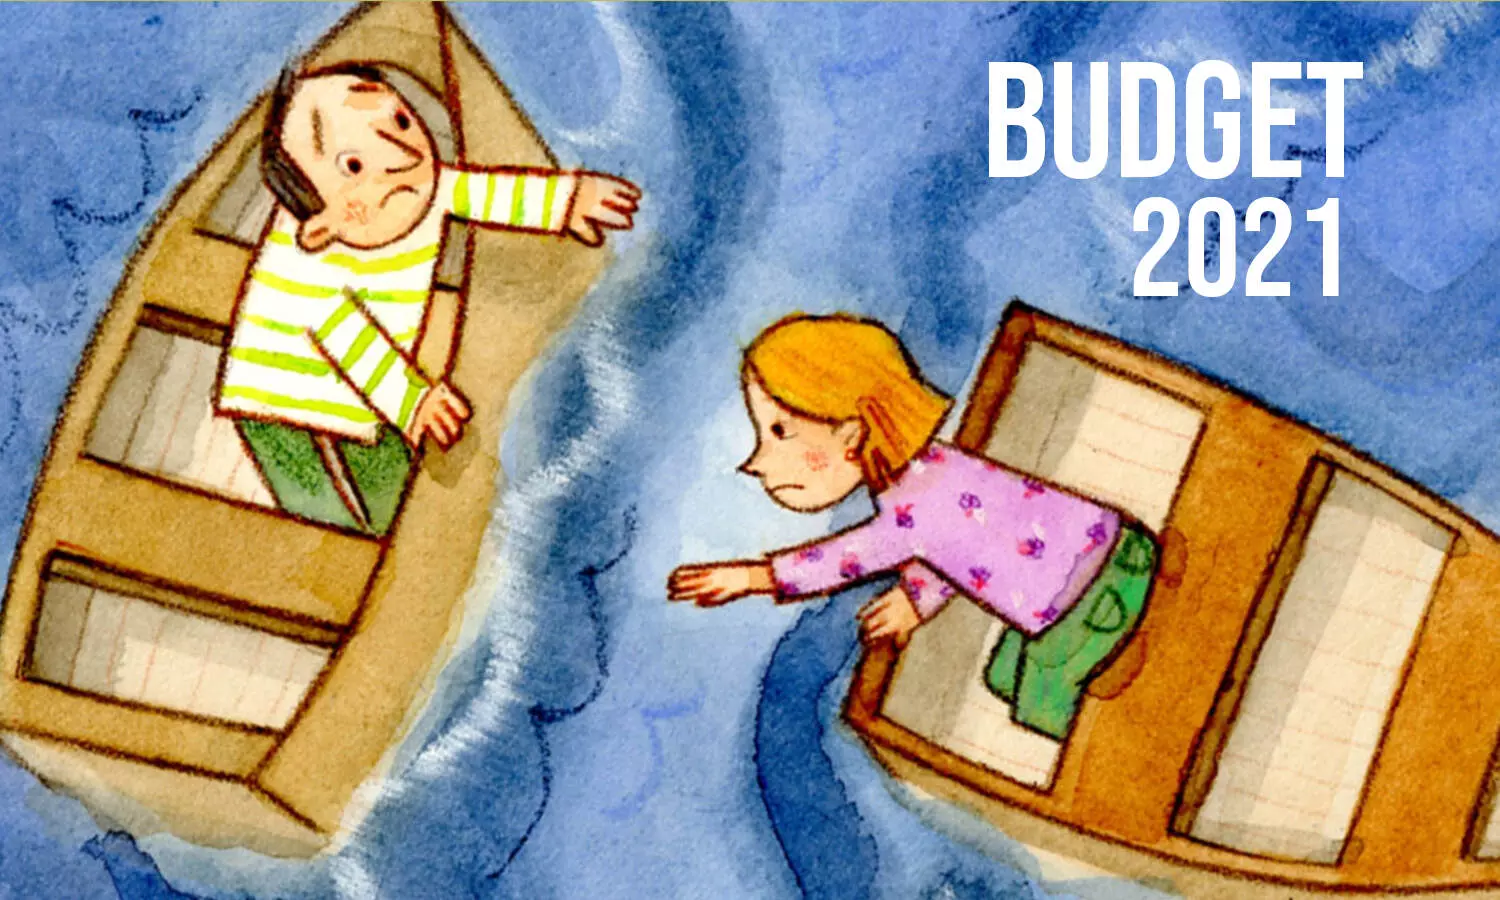 Budget 2021: New economic outlook on the anvil – Trade policy perspectives